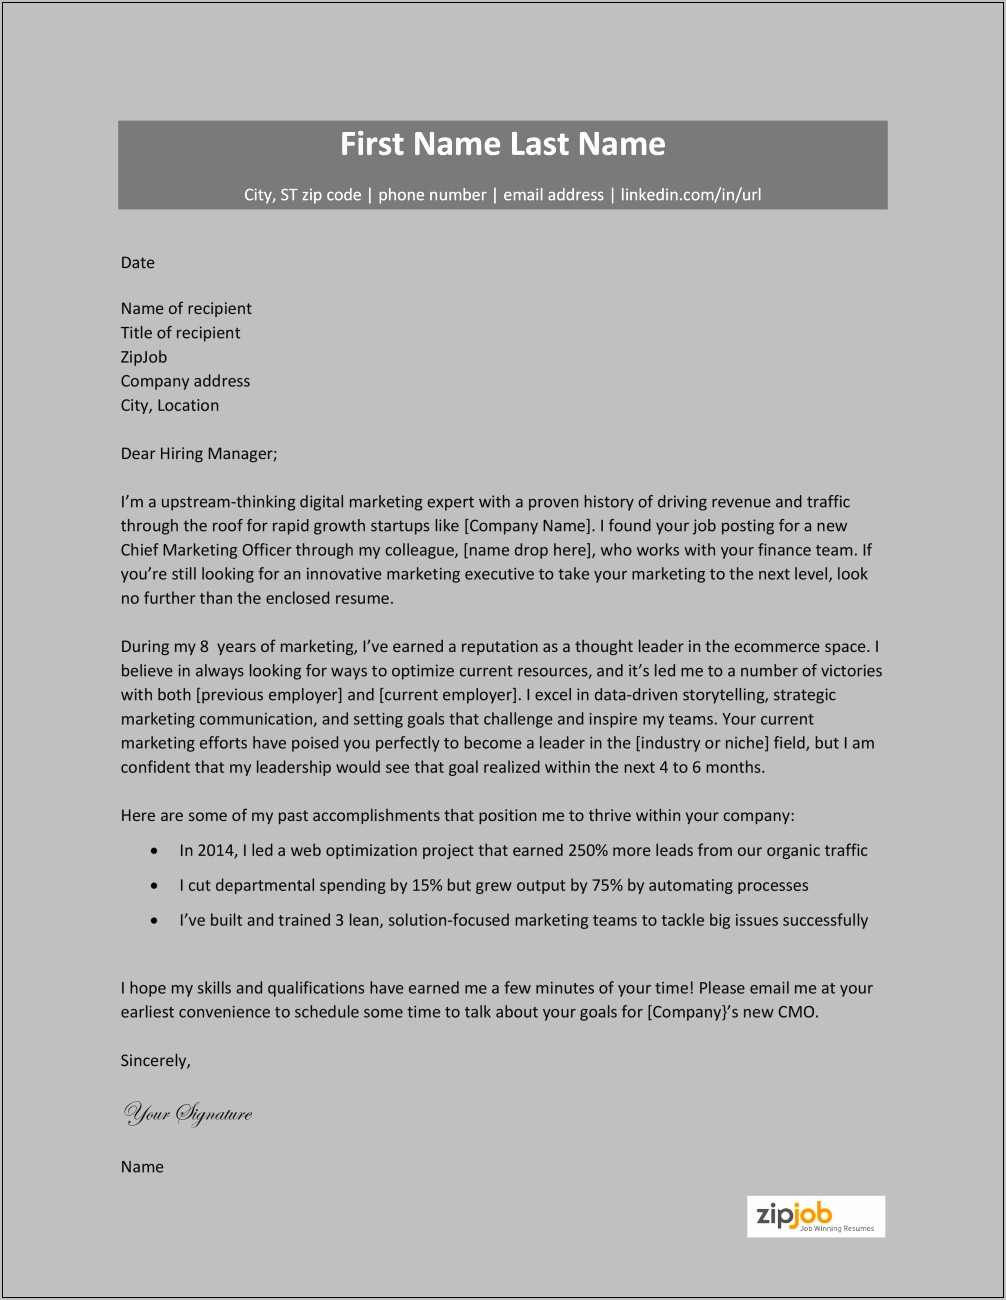 Writing An Effective Cover Letter For A Resume